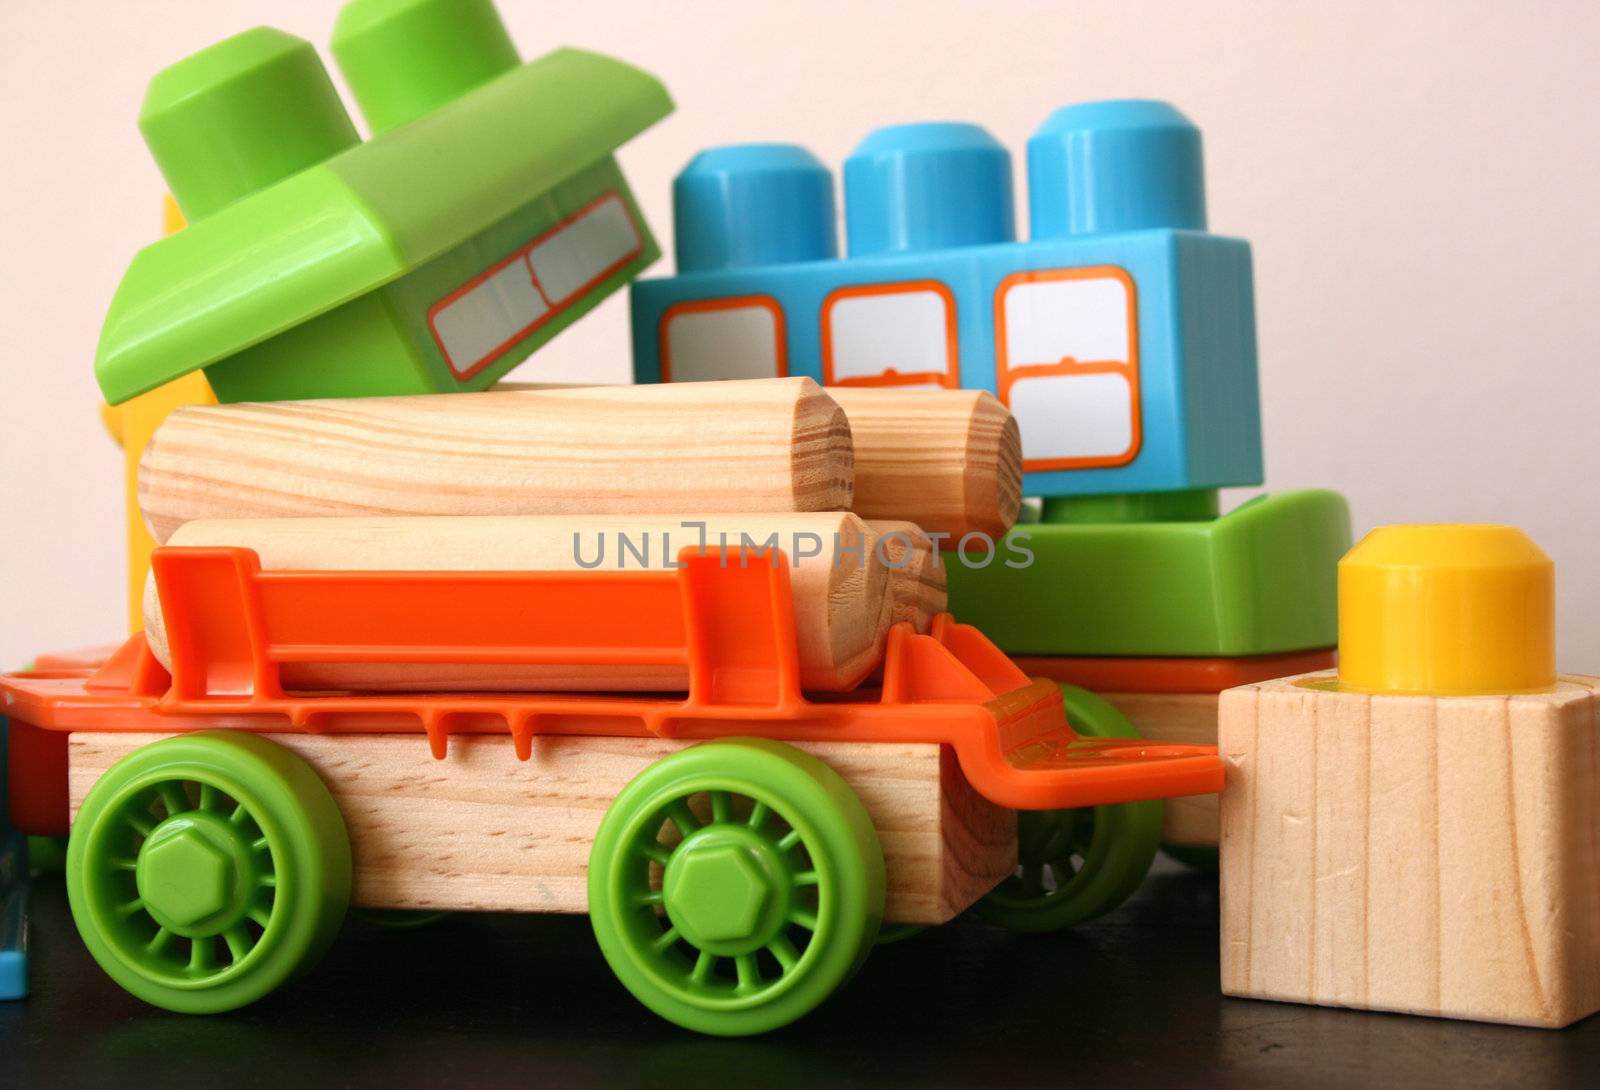 Fun educational toys for children in bright colors
